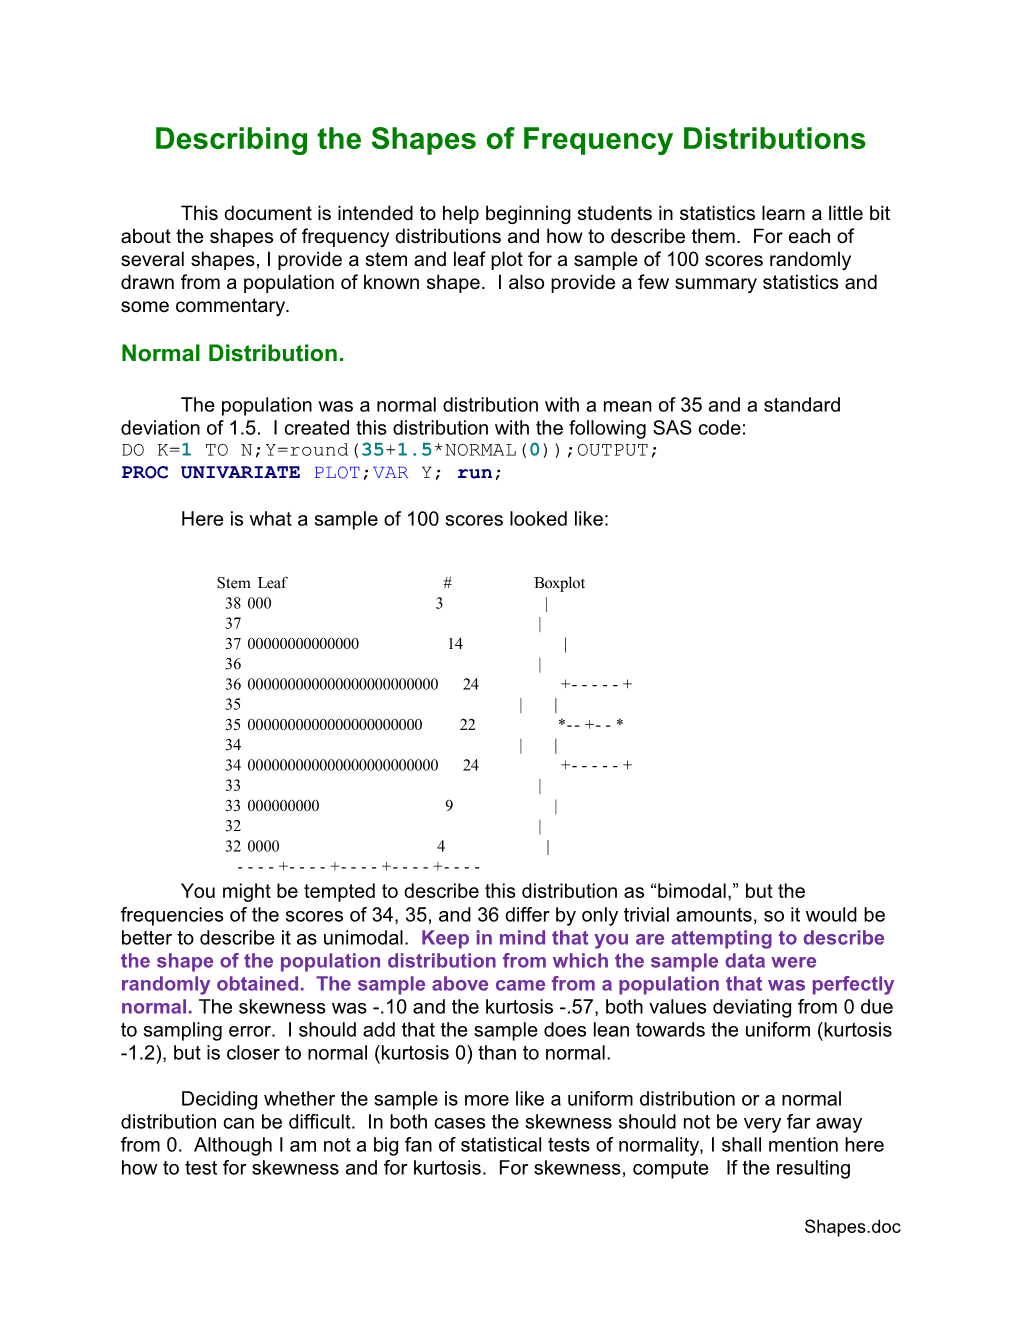 This Document Is Intended to Help Beginning Students in Statistics Learn a Little Bit About